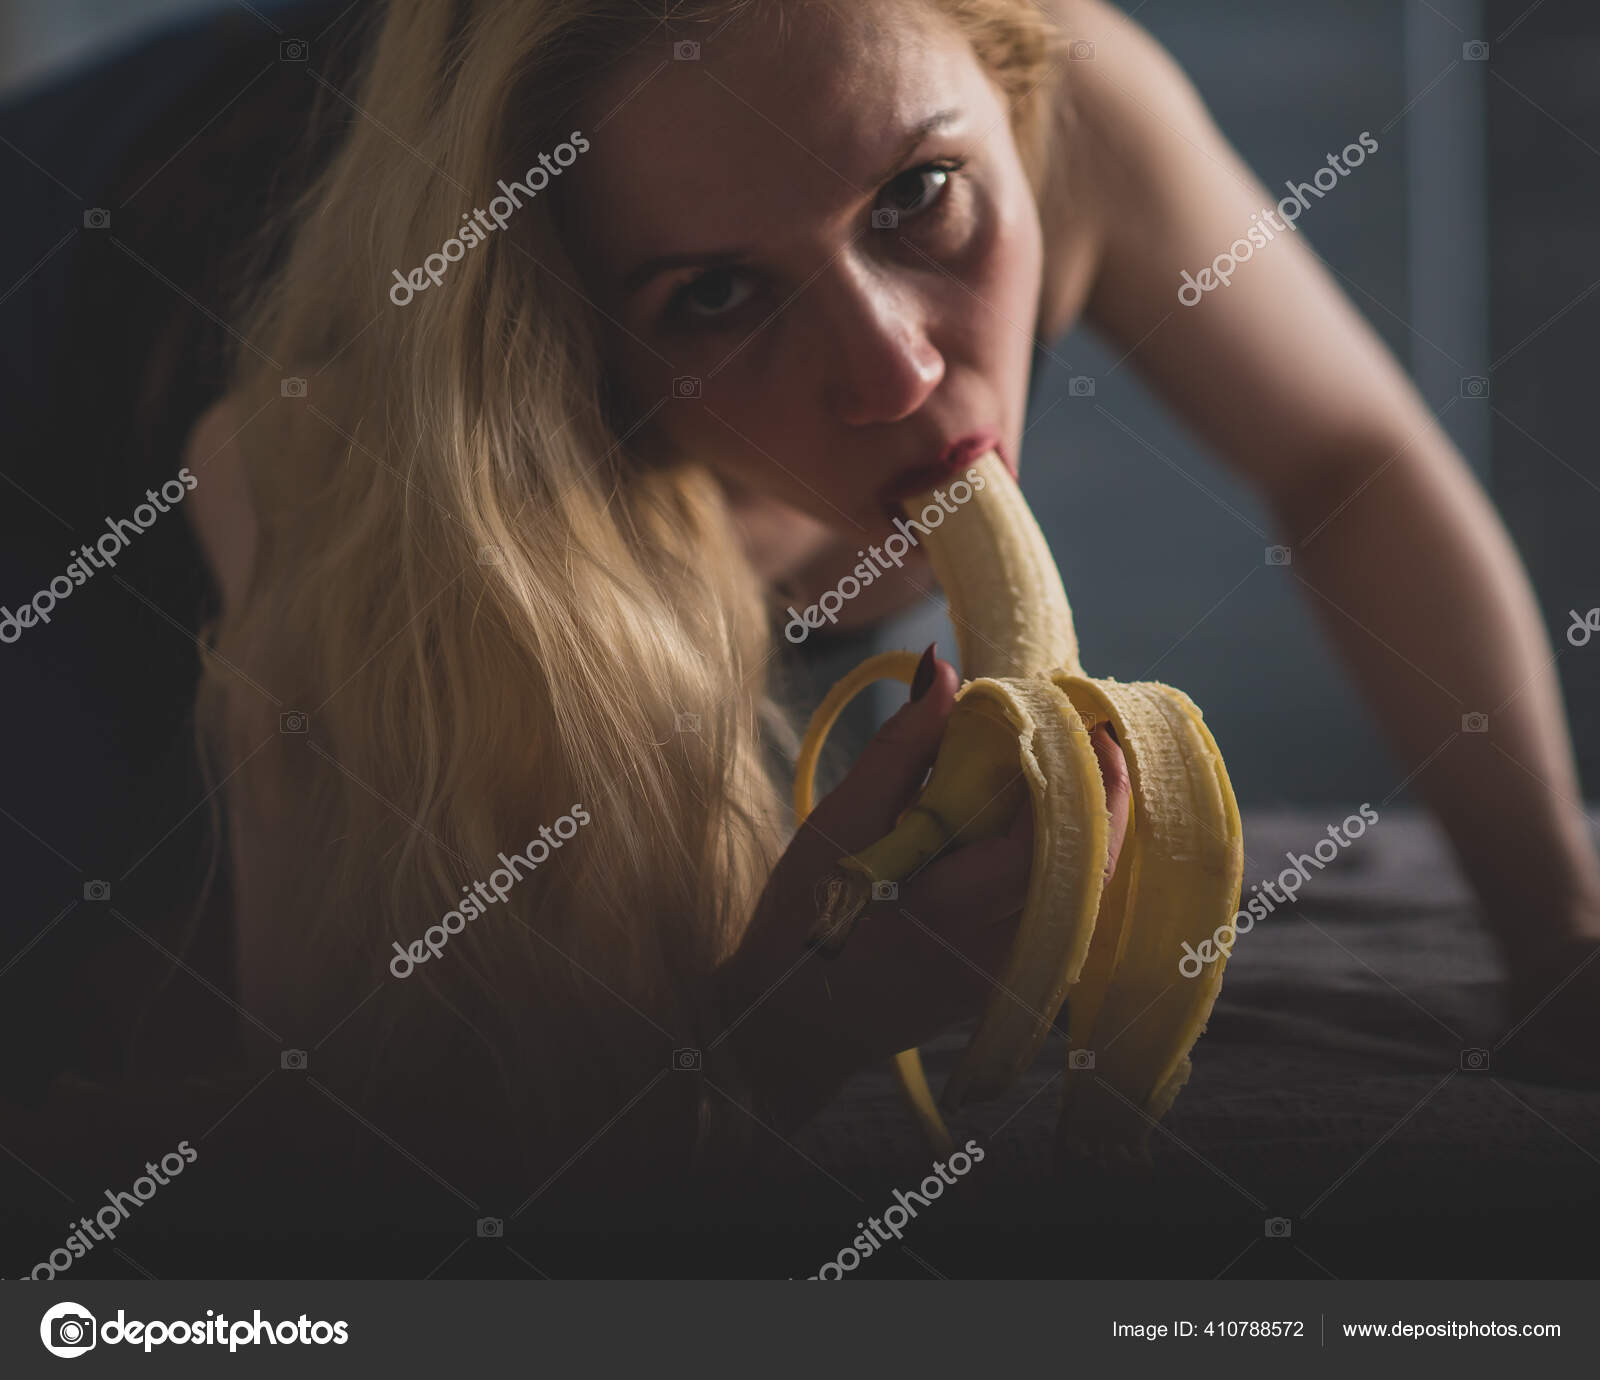 The blonde imitates oral sex and sucks a banana Stock Photo by ©inside-studio 410788572 picture